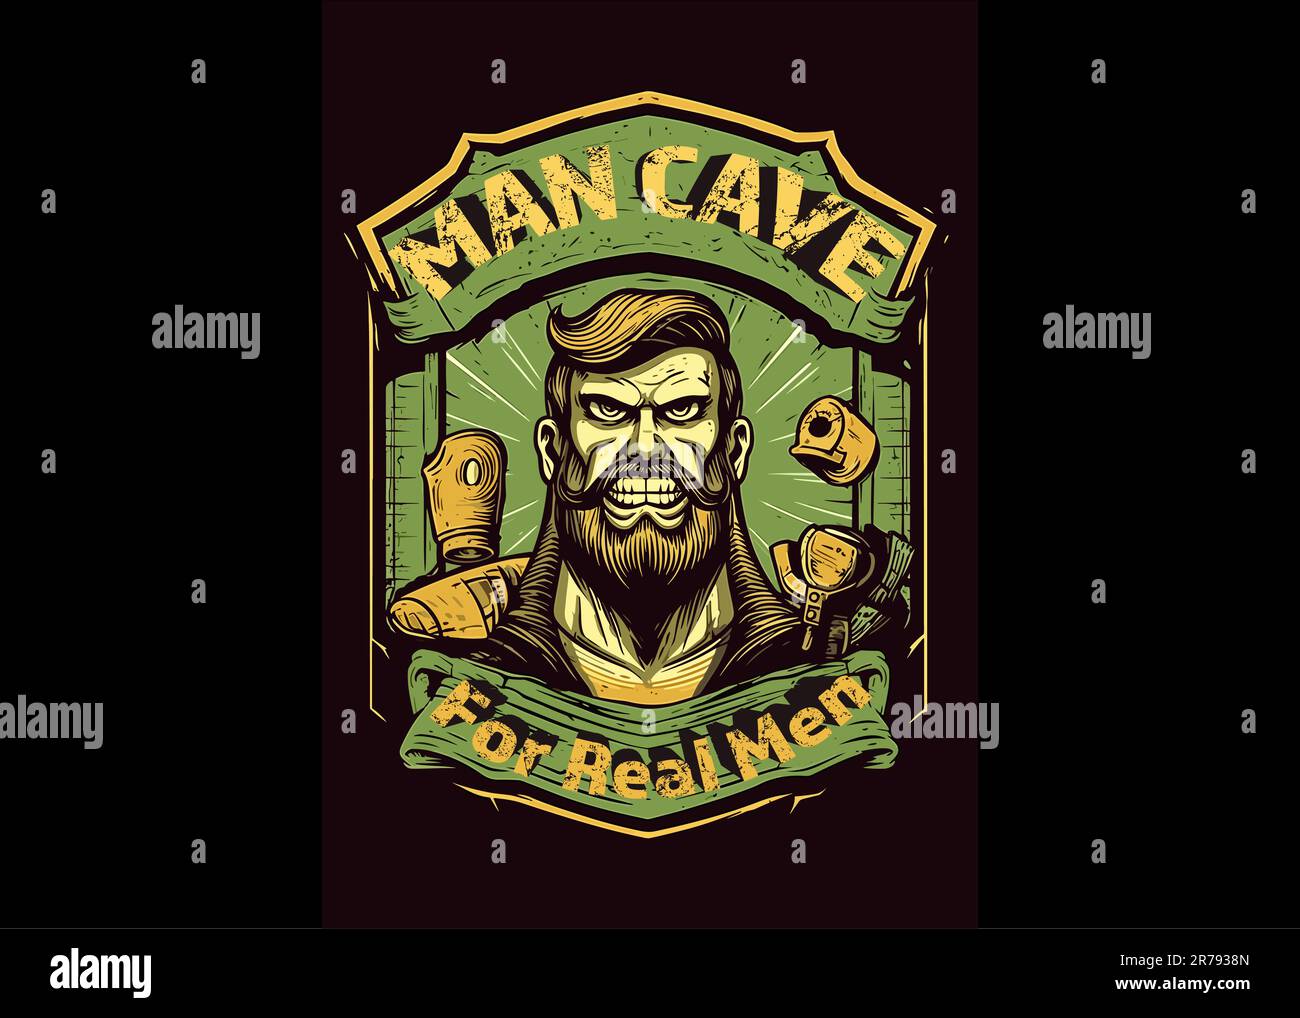 Man Cave Sign - For Real Men vector illustration Stock Photo